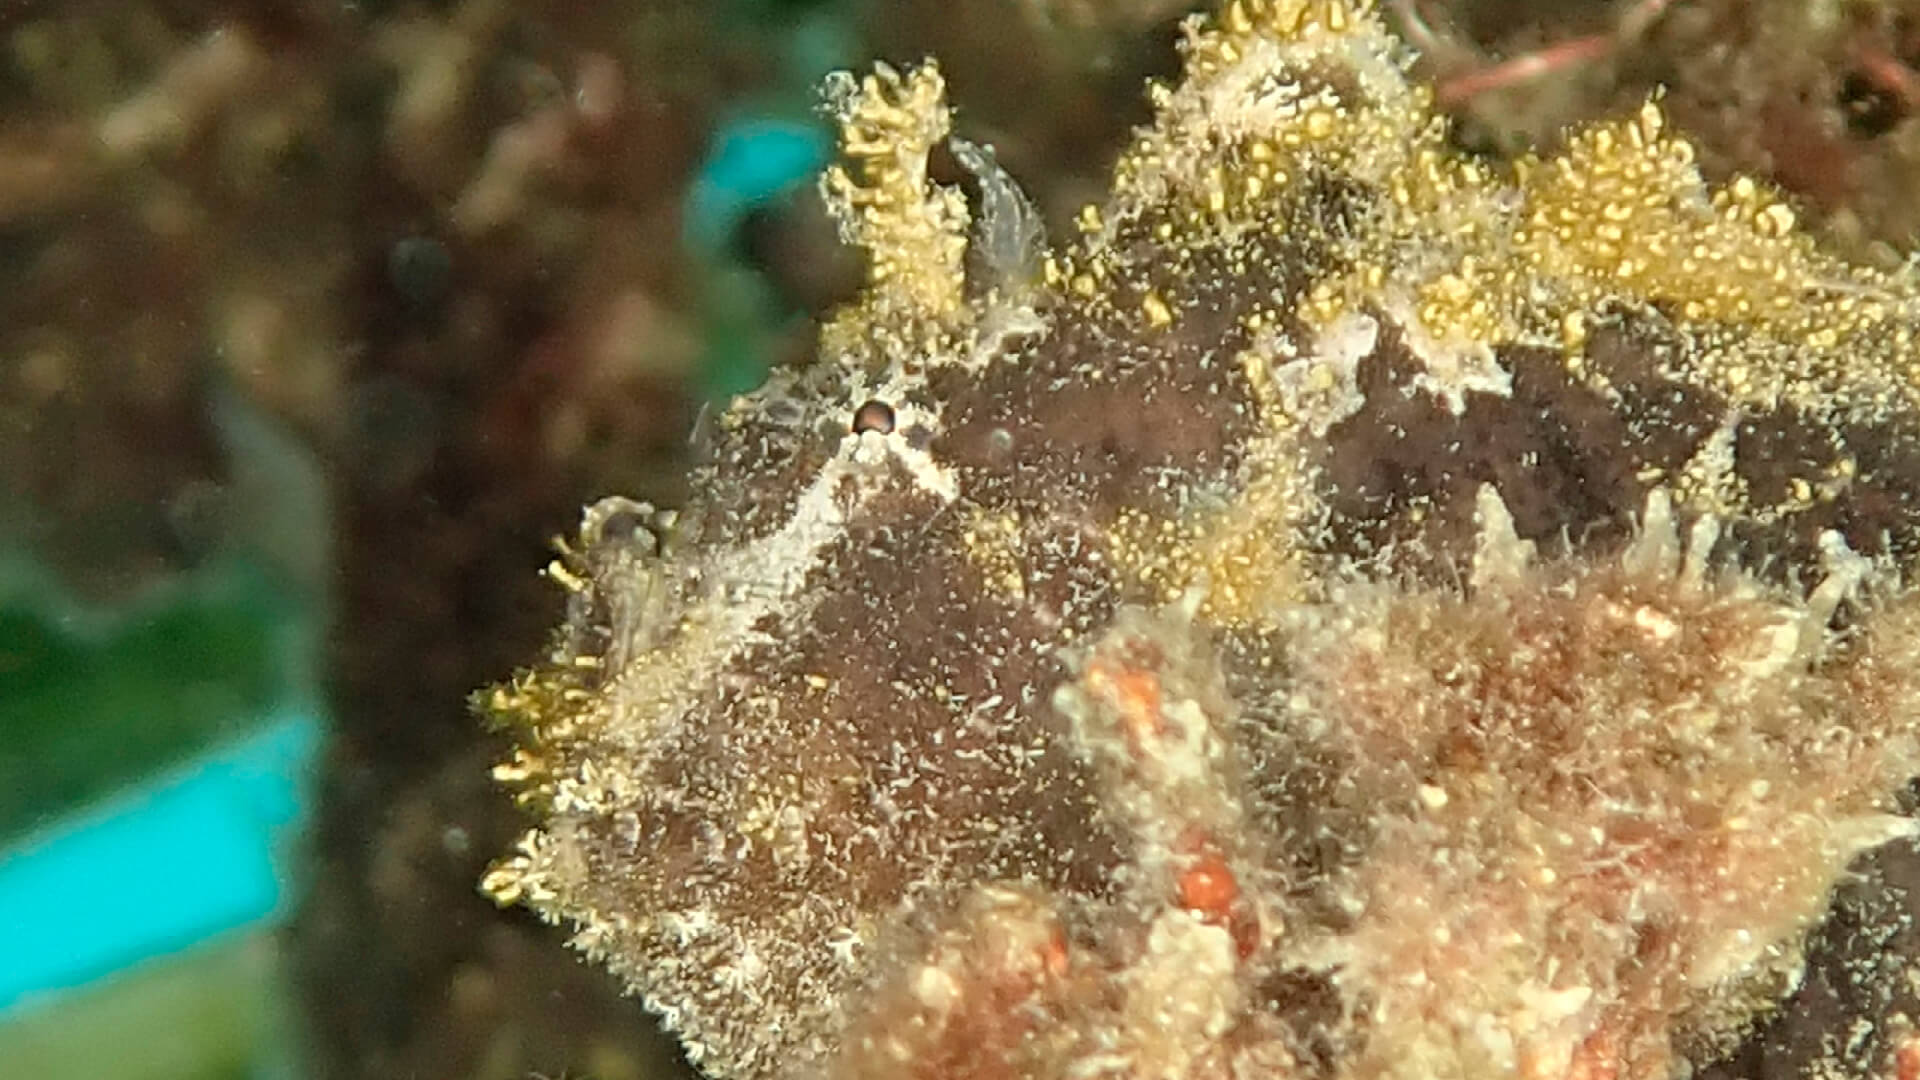 the frogfish would be almost impossible to see without a light source in your diving kit